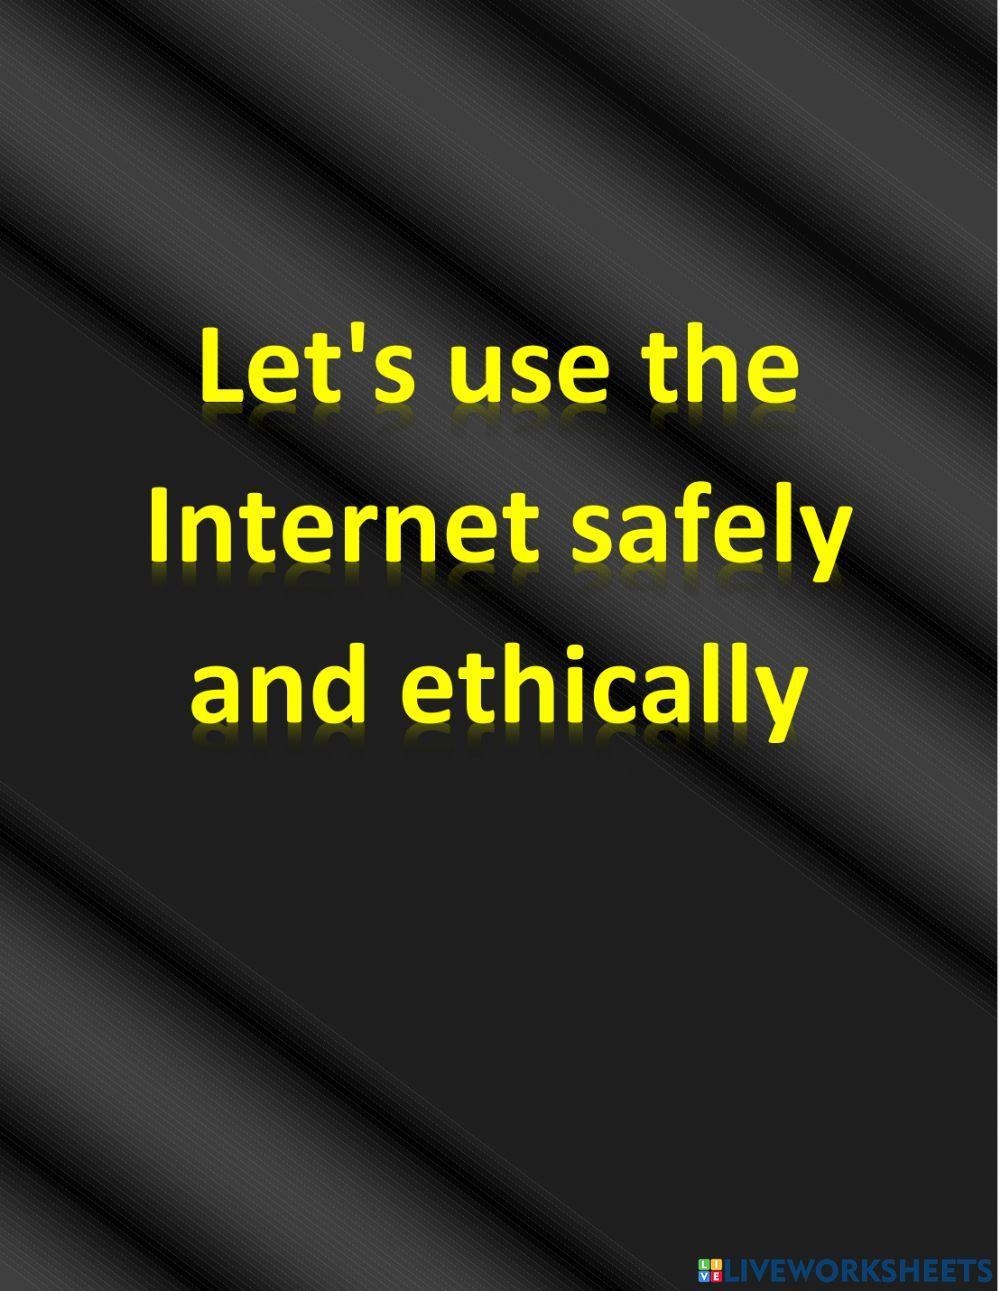 Let's use the Internet safely and ethically